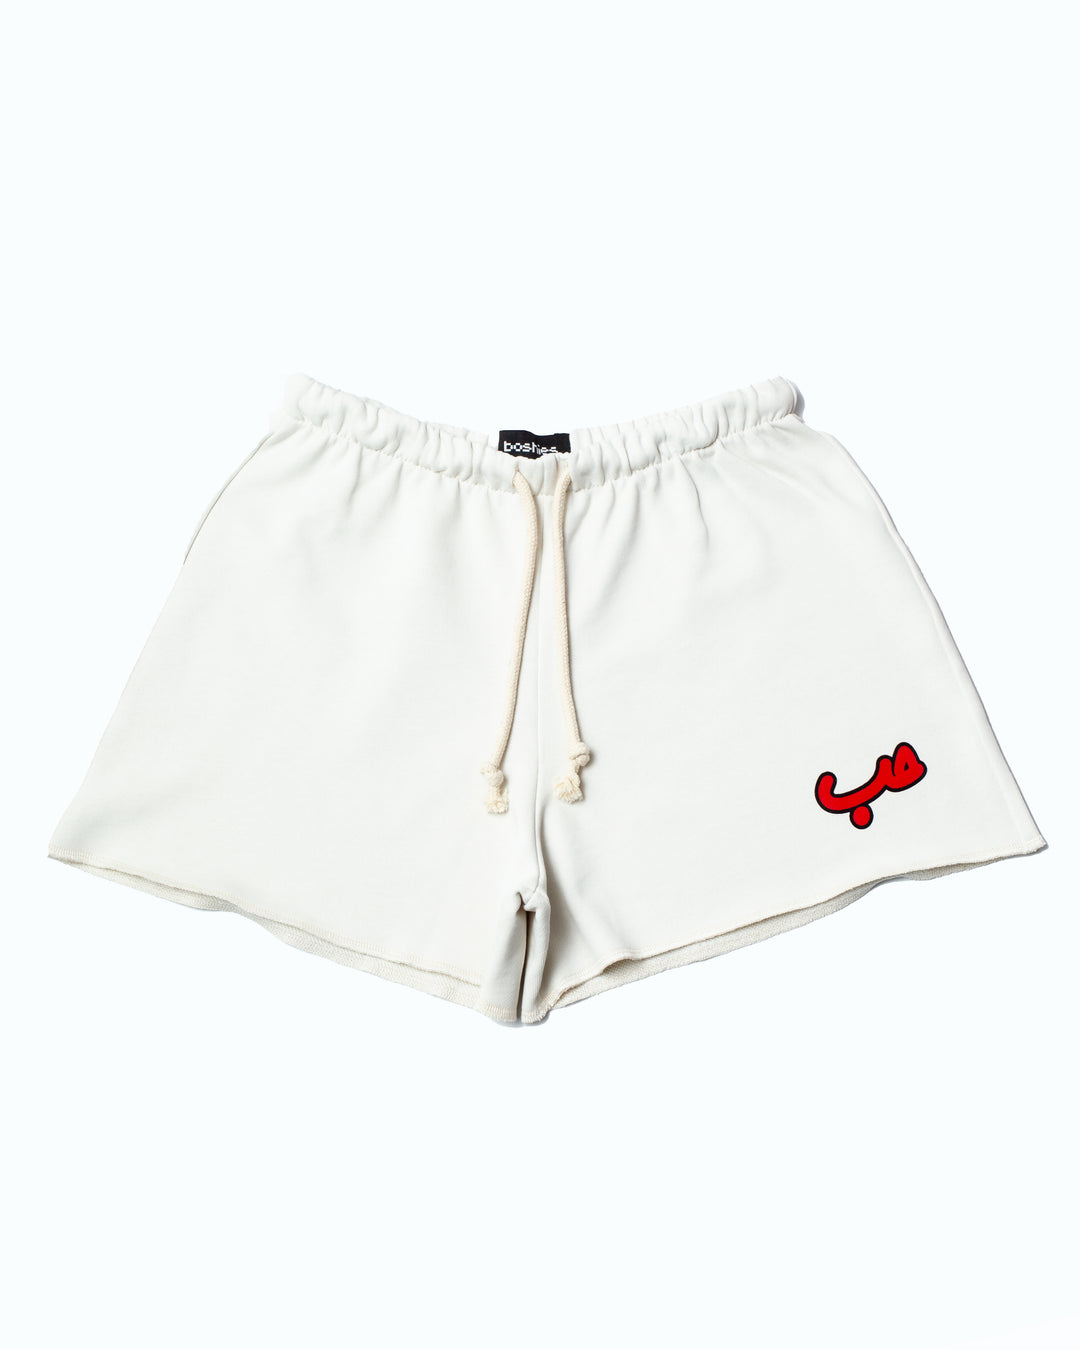 Flared off white Short with Hobb written in Arabic حب and printed in red silkscreen on the side of the short.